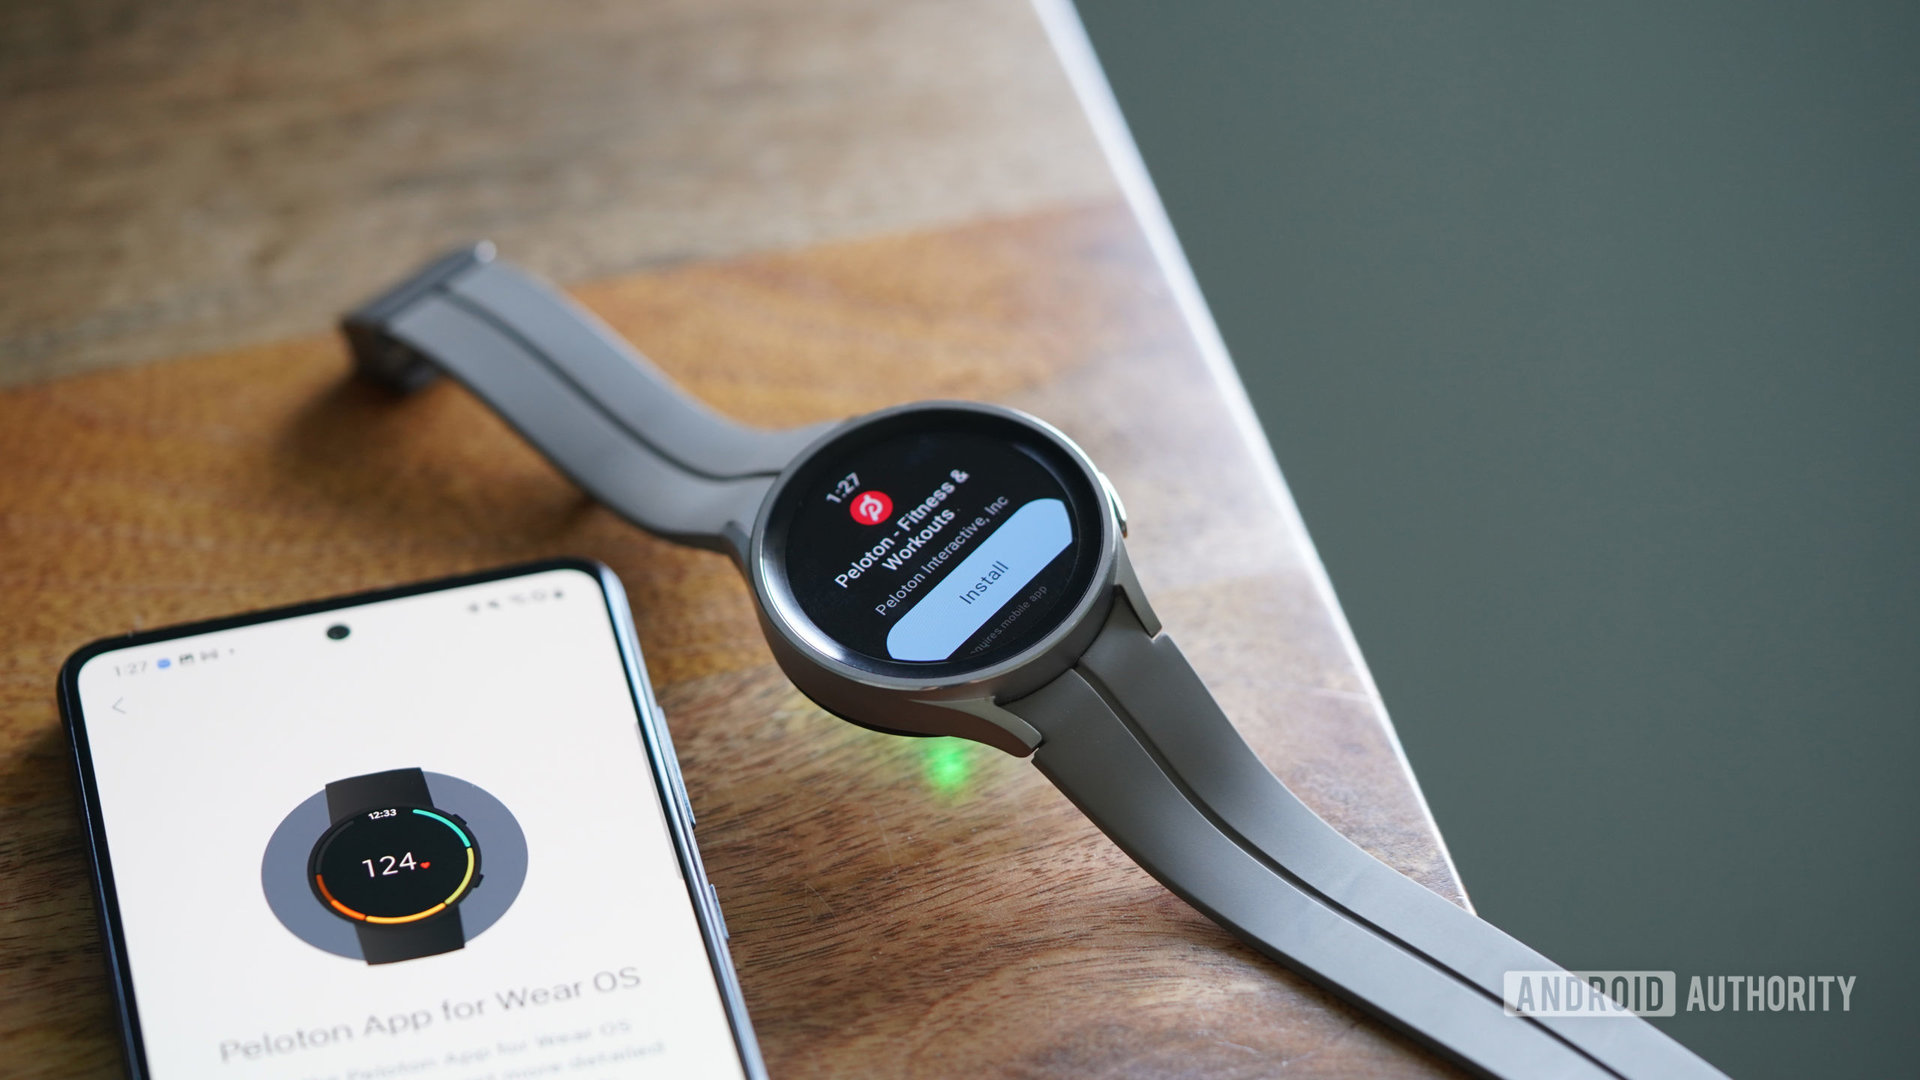 A Galaxy Watch 5 Pro and Galaxy A51 display screens for setting up the Wear OS Peloton app.